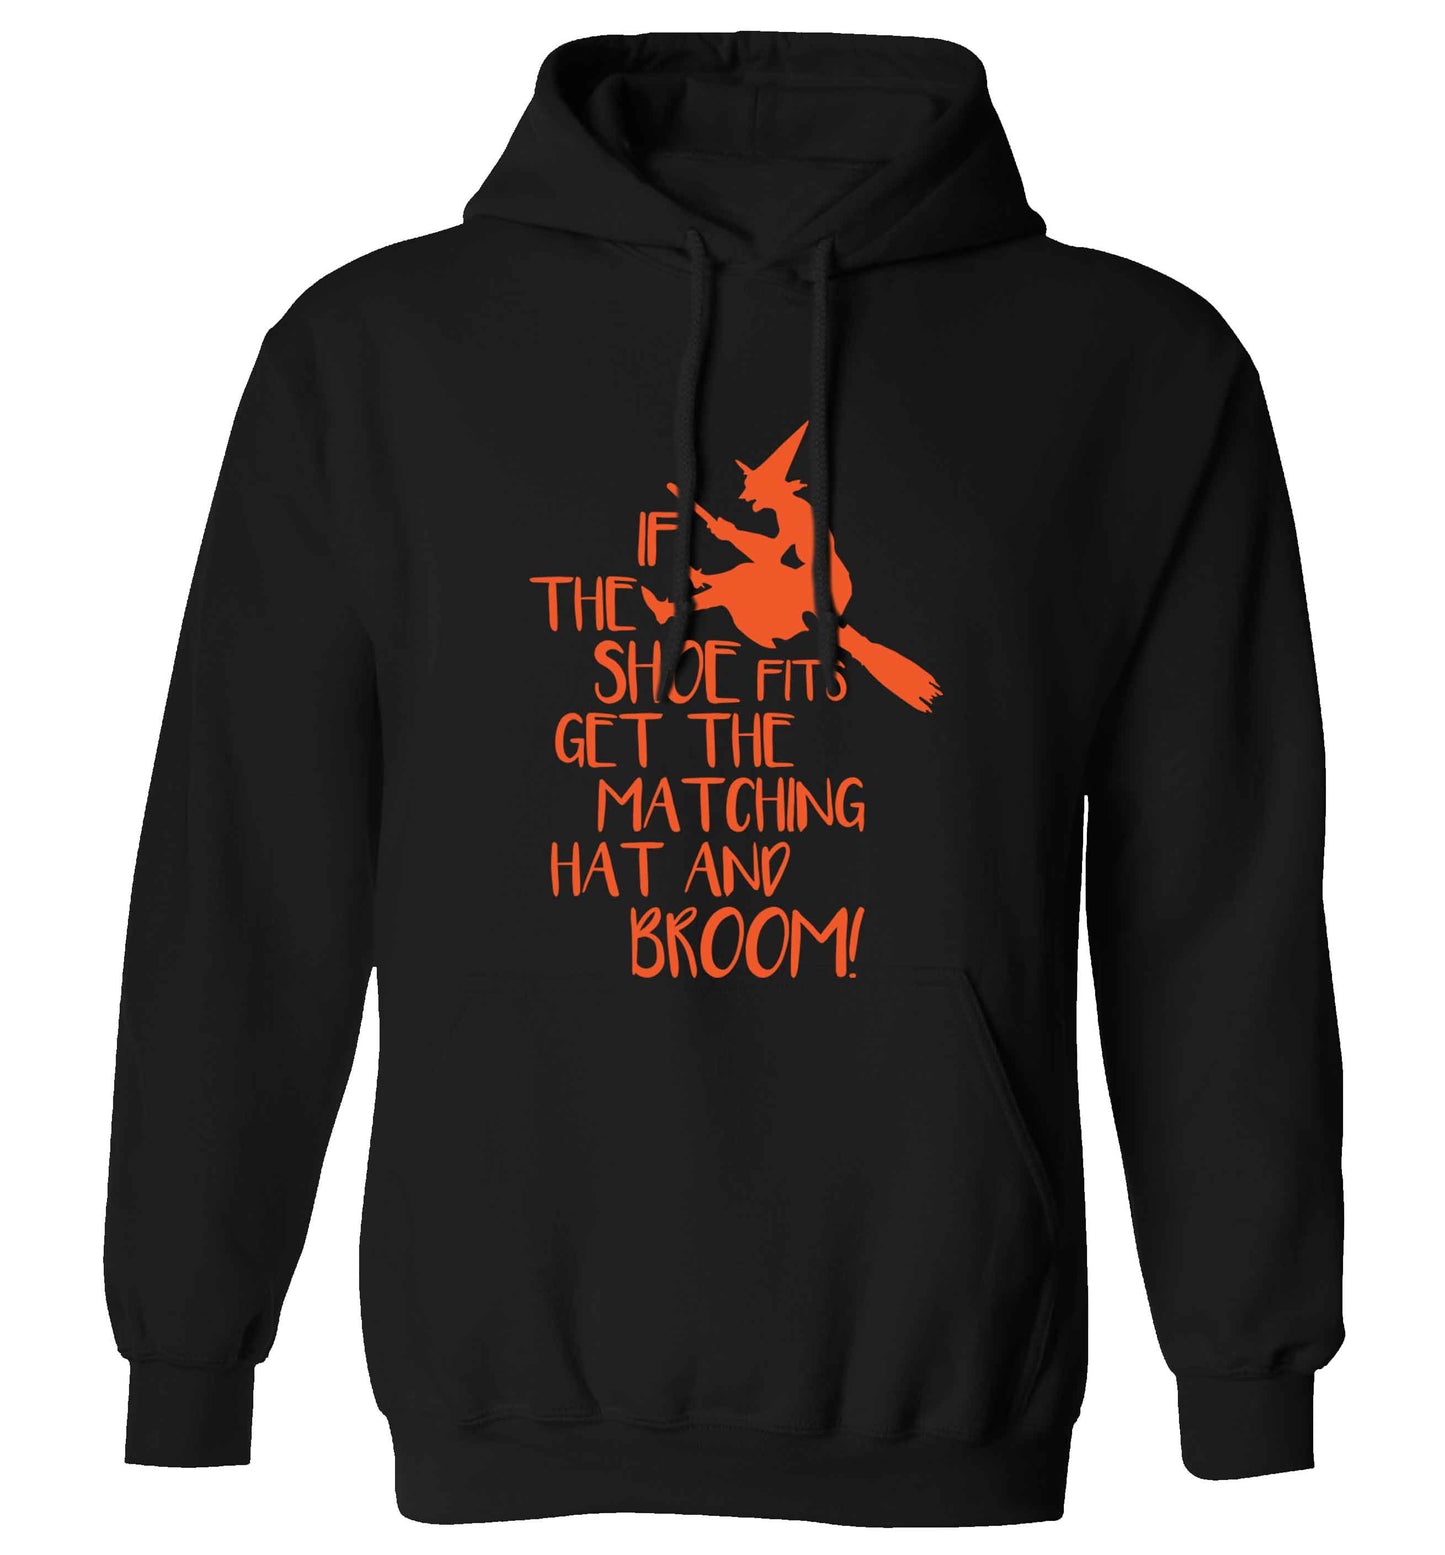 If the shoe fits get the matching hat and broom adults unisex black hoodie 2XL